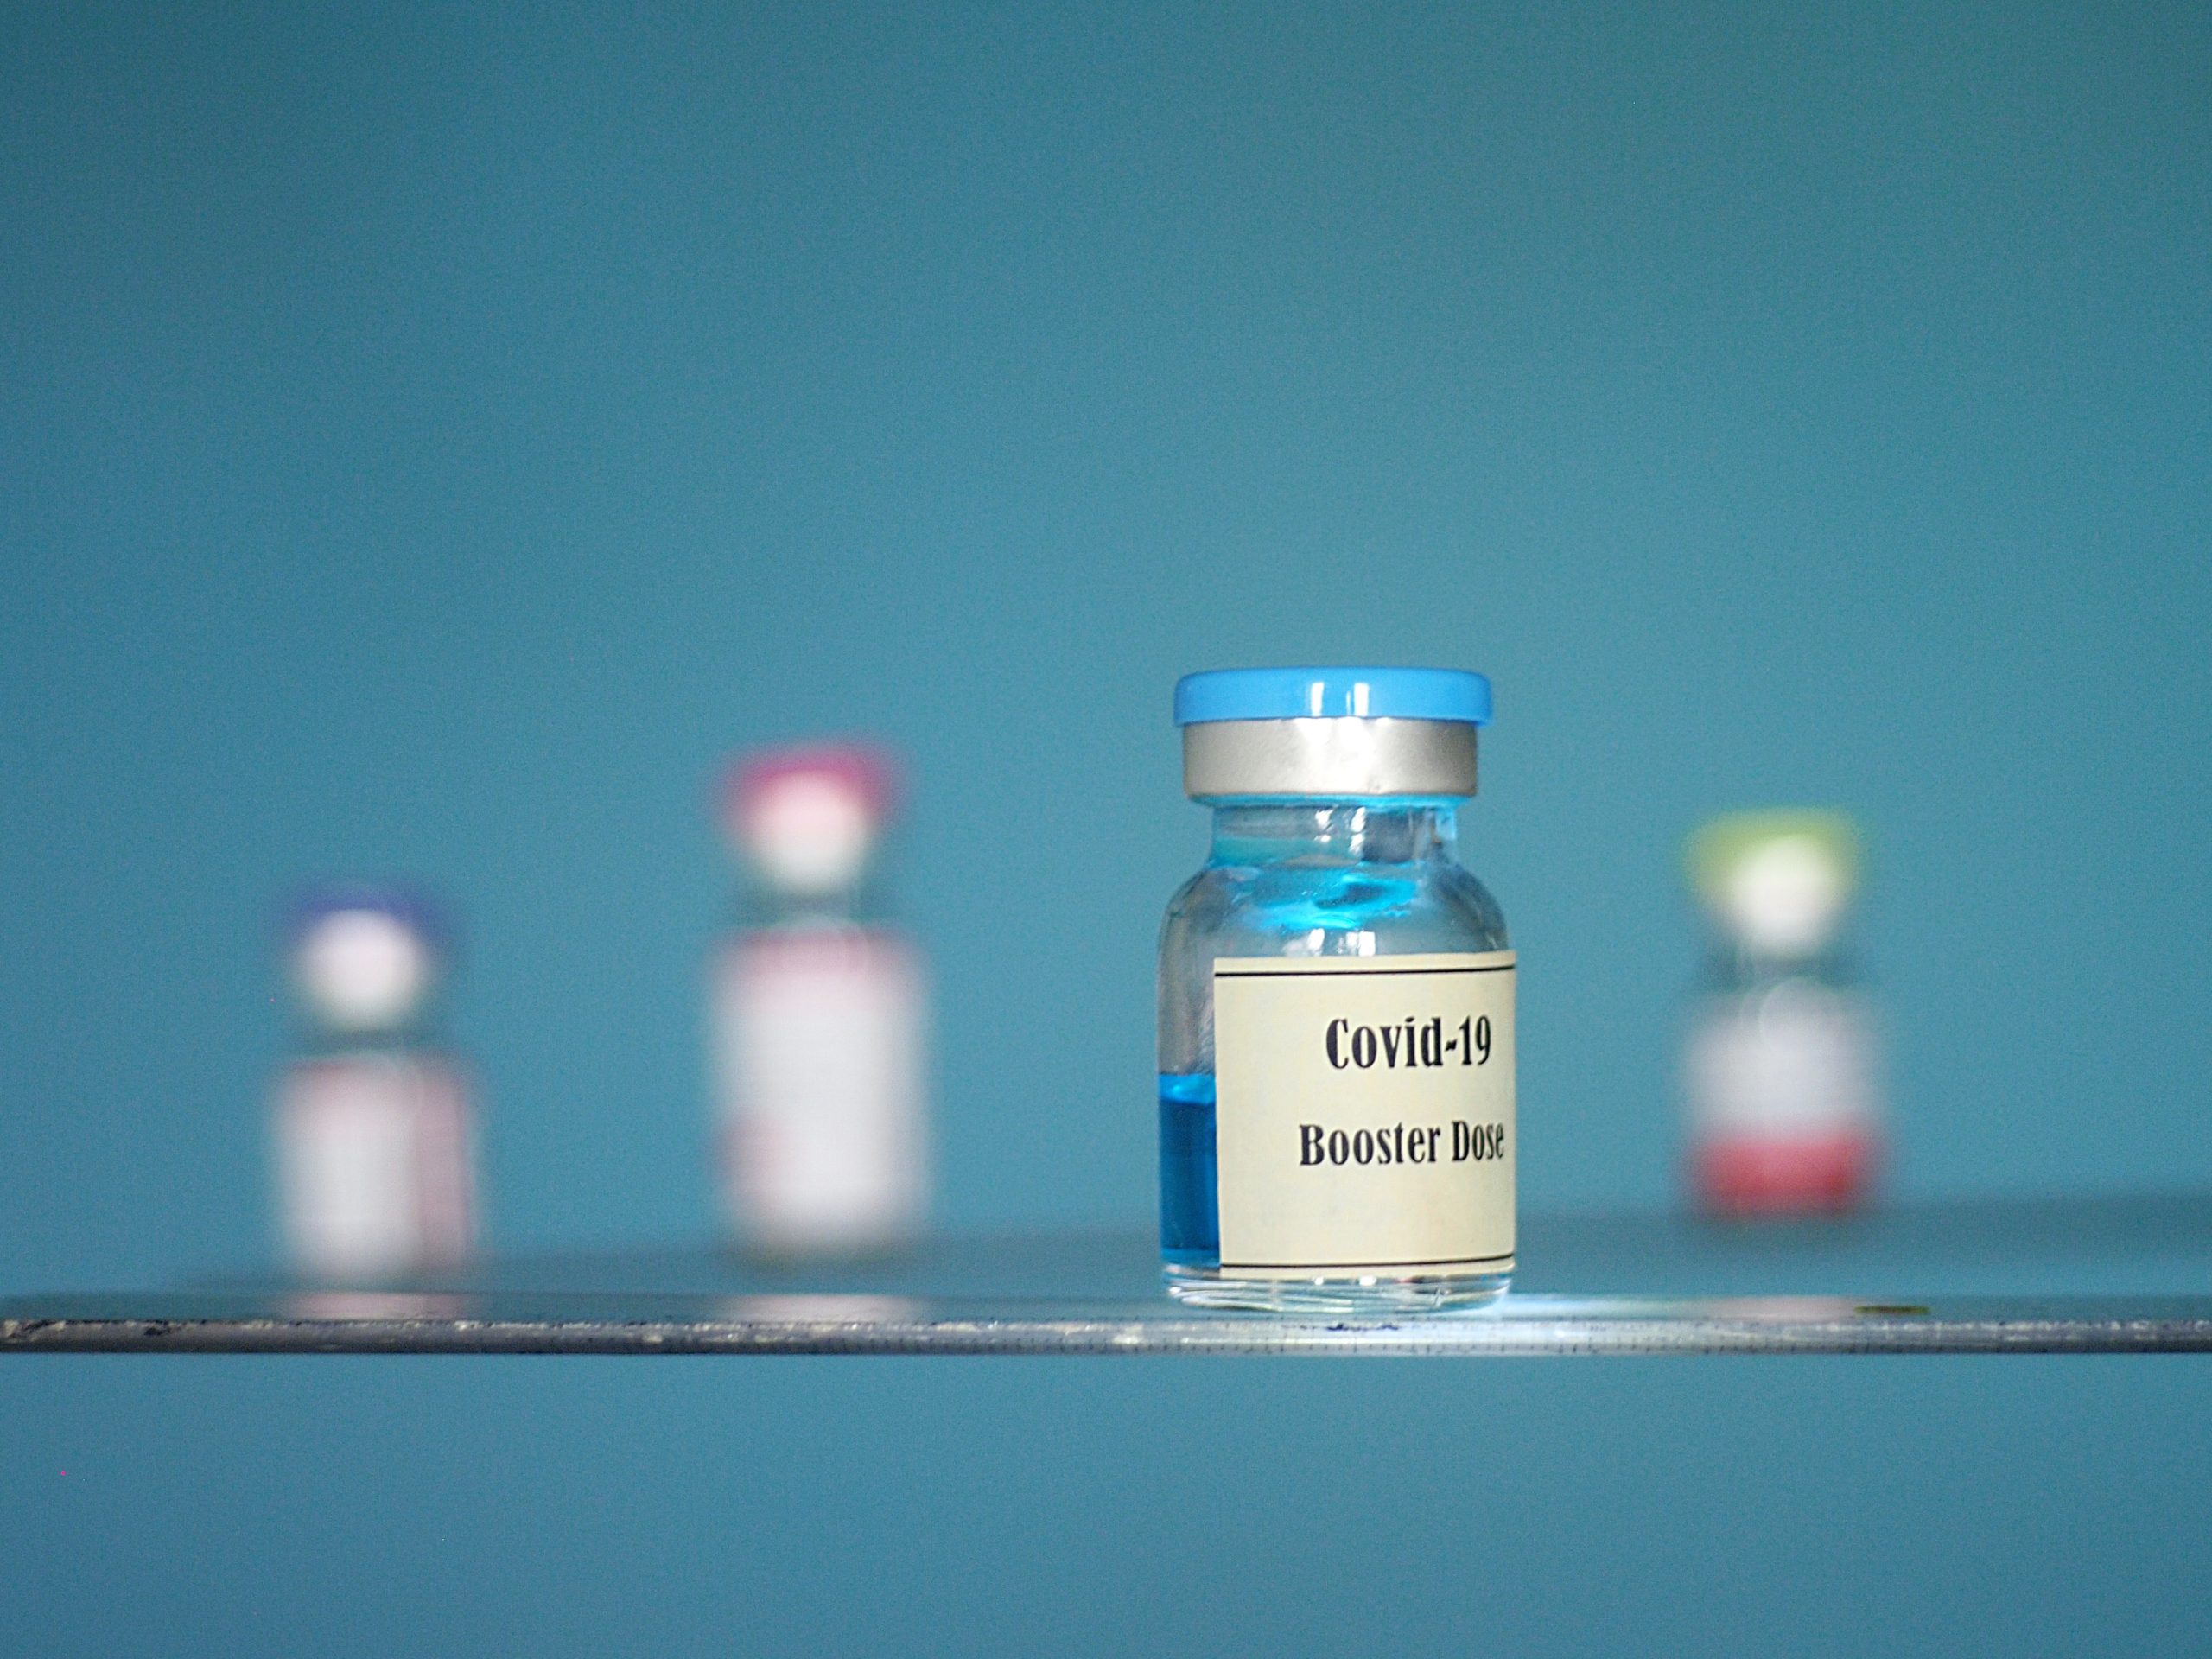 Covid-19 Vaccines Have Saved Millions of American Lives; Booster Shots are Critical